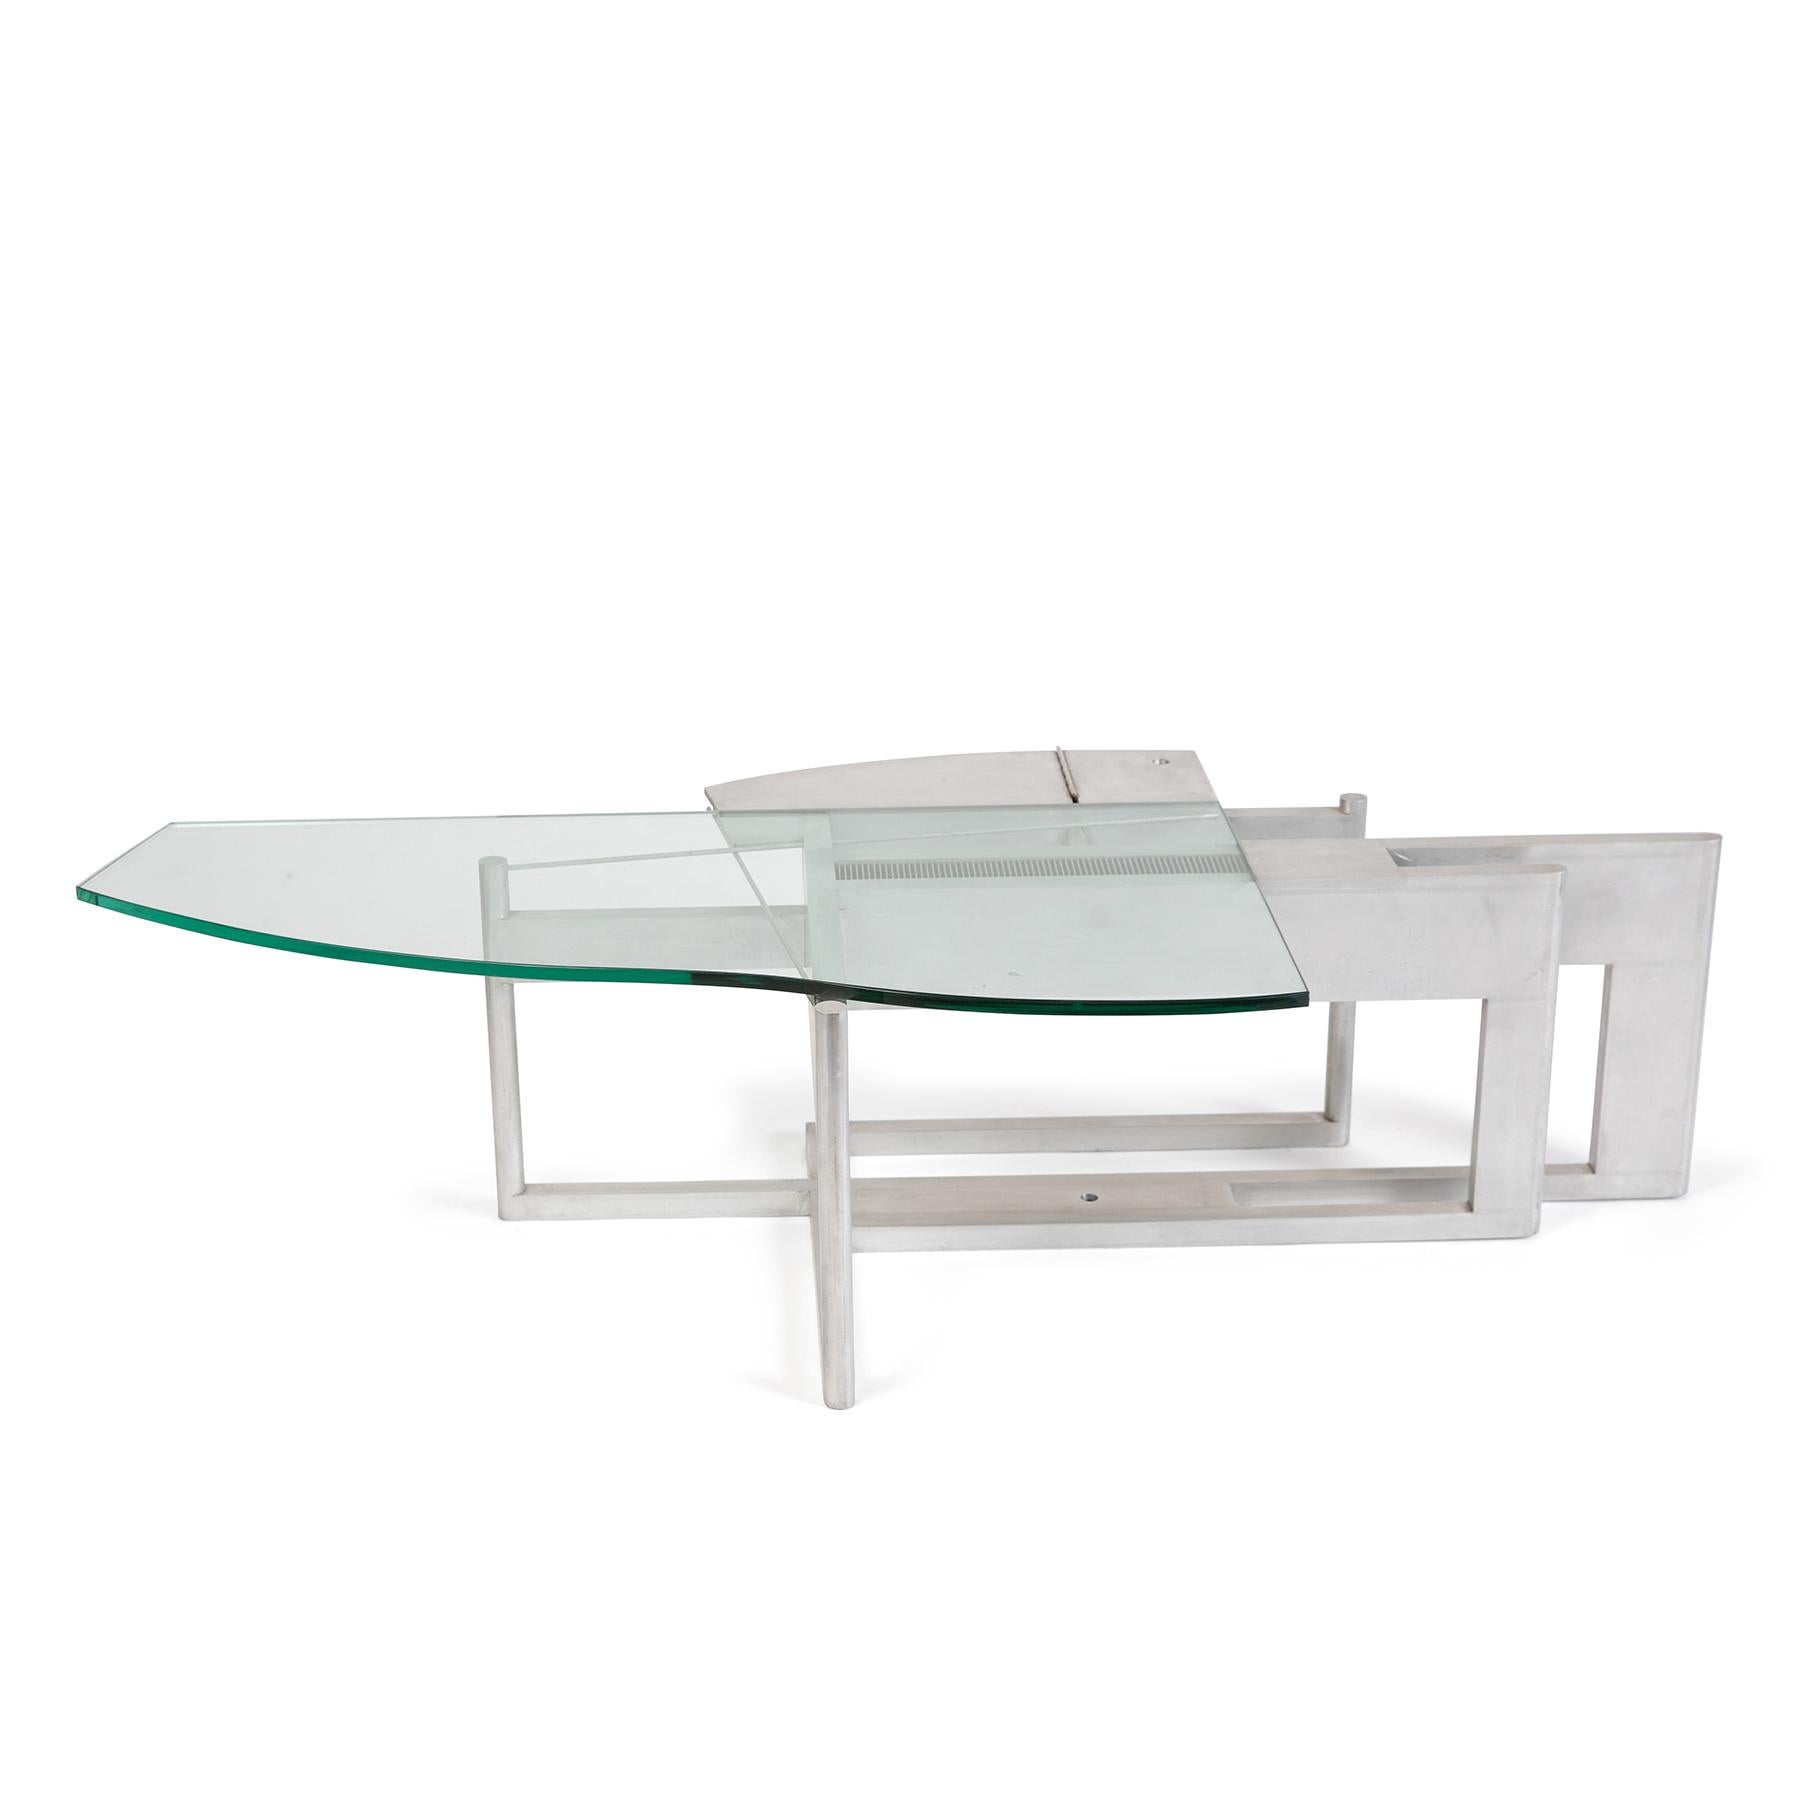 Miami designer Robert Whitton one-off prototype coffee table in brushed matte aluminum and free form glass.